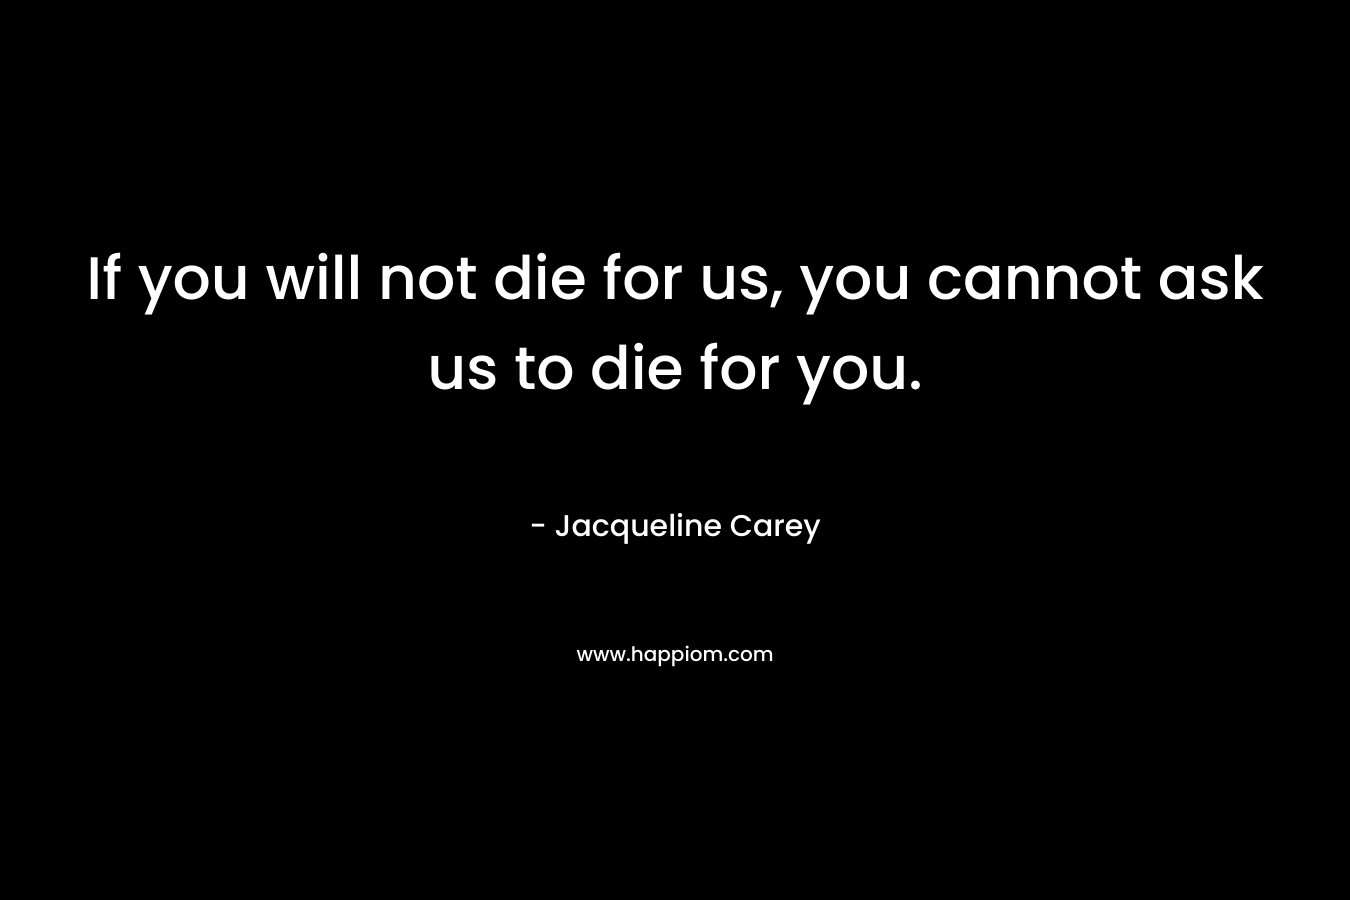 If you will not die for us, you cannot ask us to die for you. – Jacqueline Carey